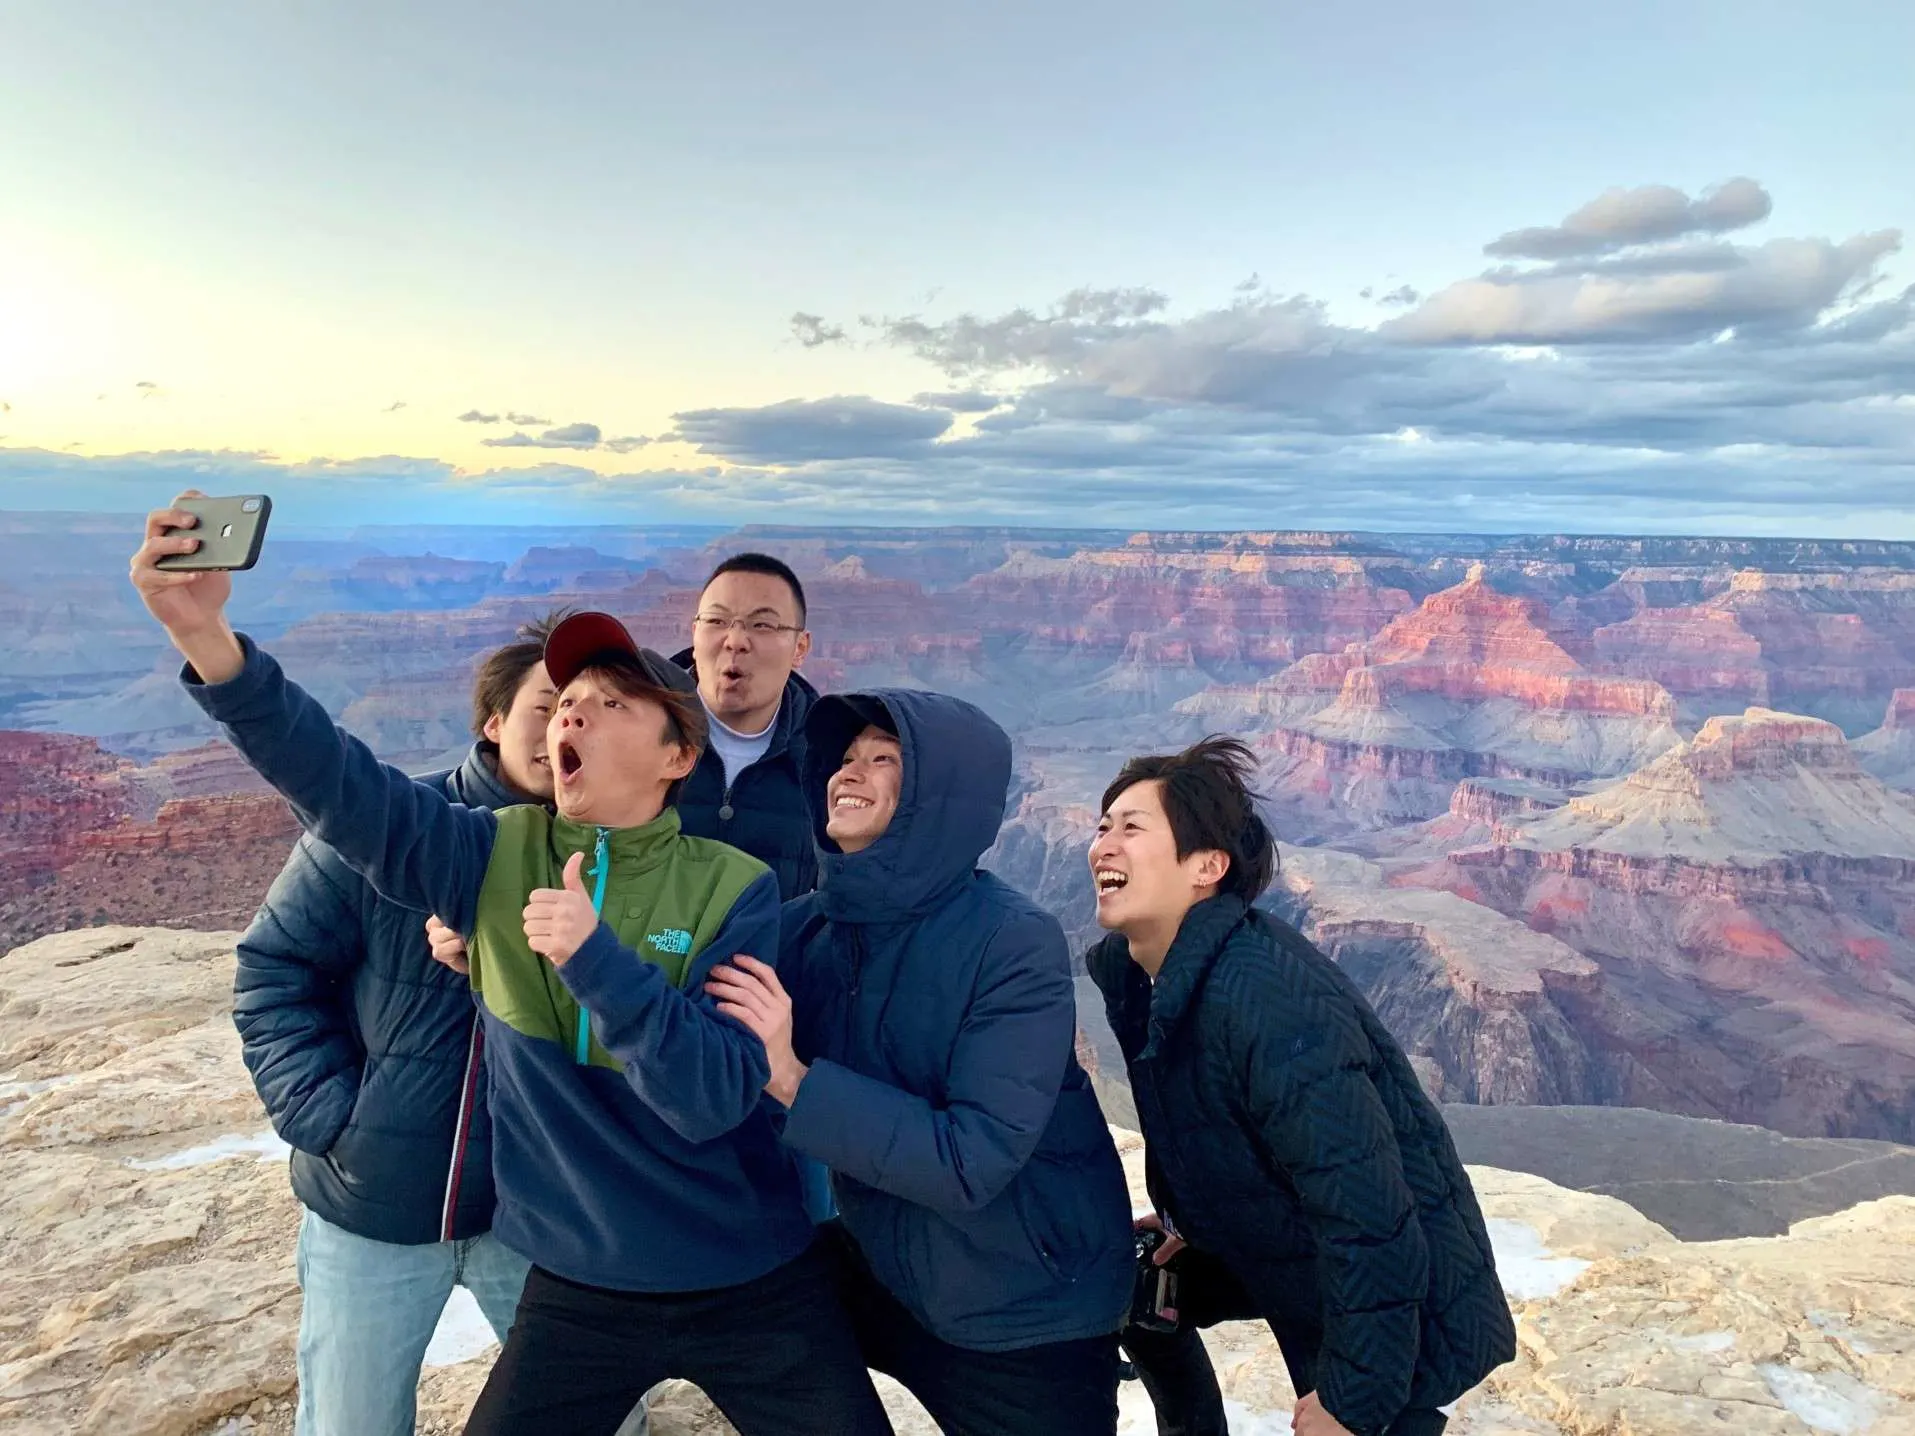 Family visiting #1 place to visit in the US: Grand Canyon